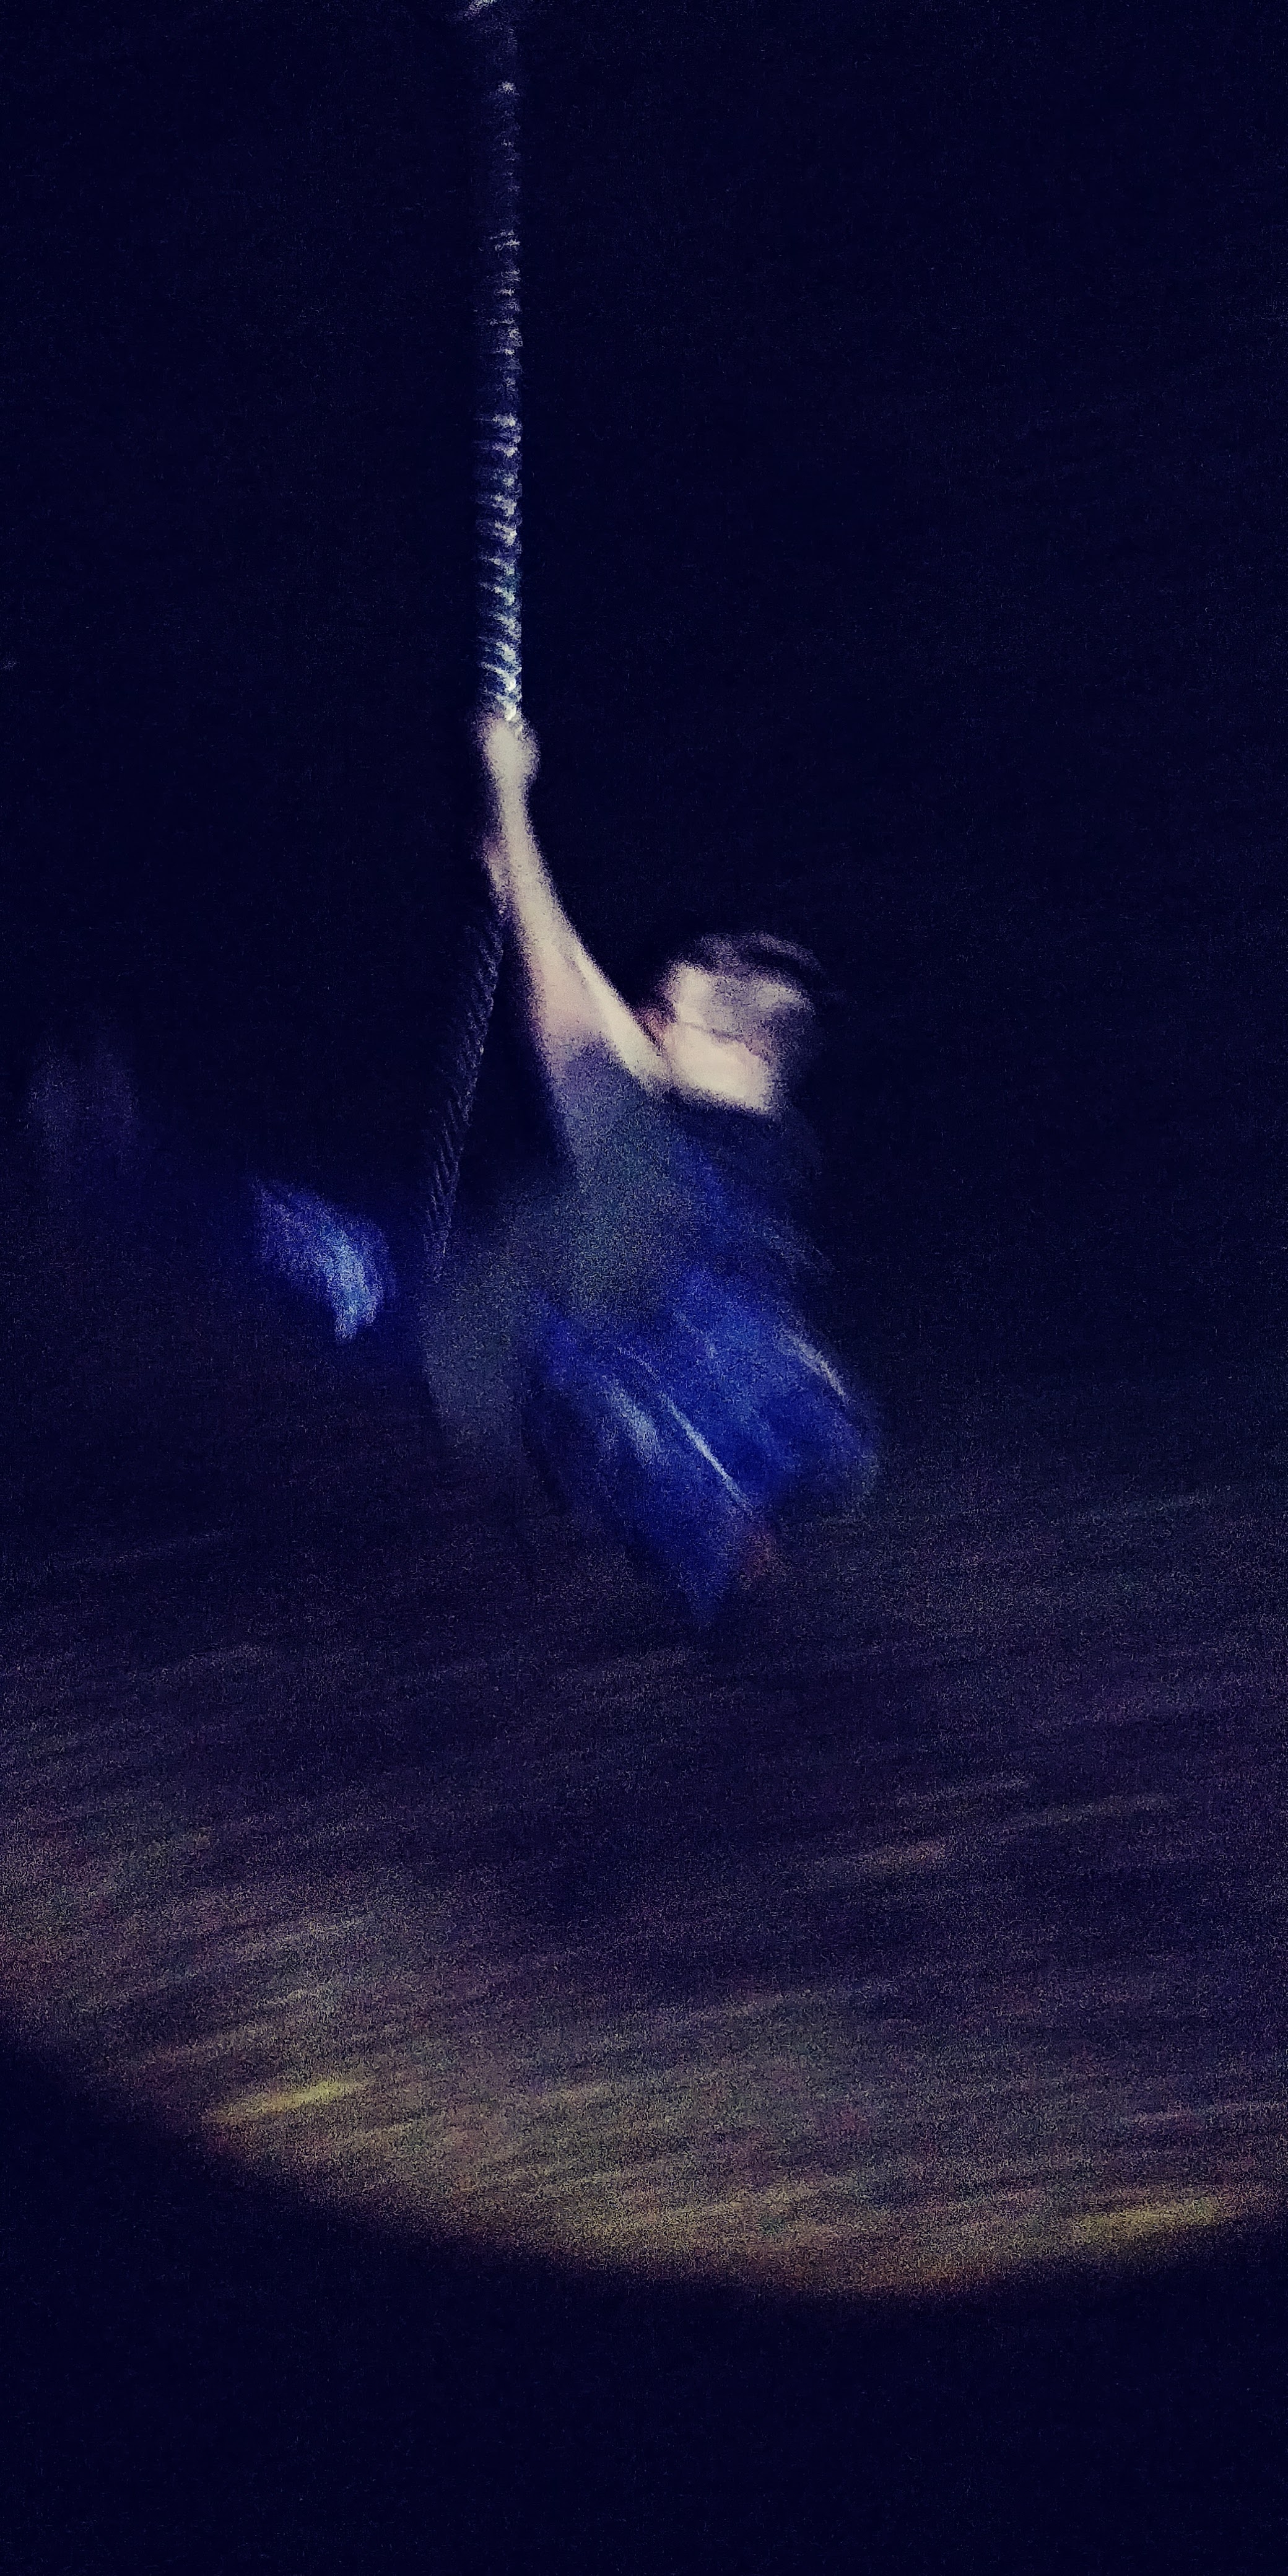 Me, on the line (I'm not sure why I thought it was a good idea to zipline with a backpack.. Maybe it was the Chopfab).